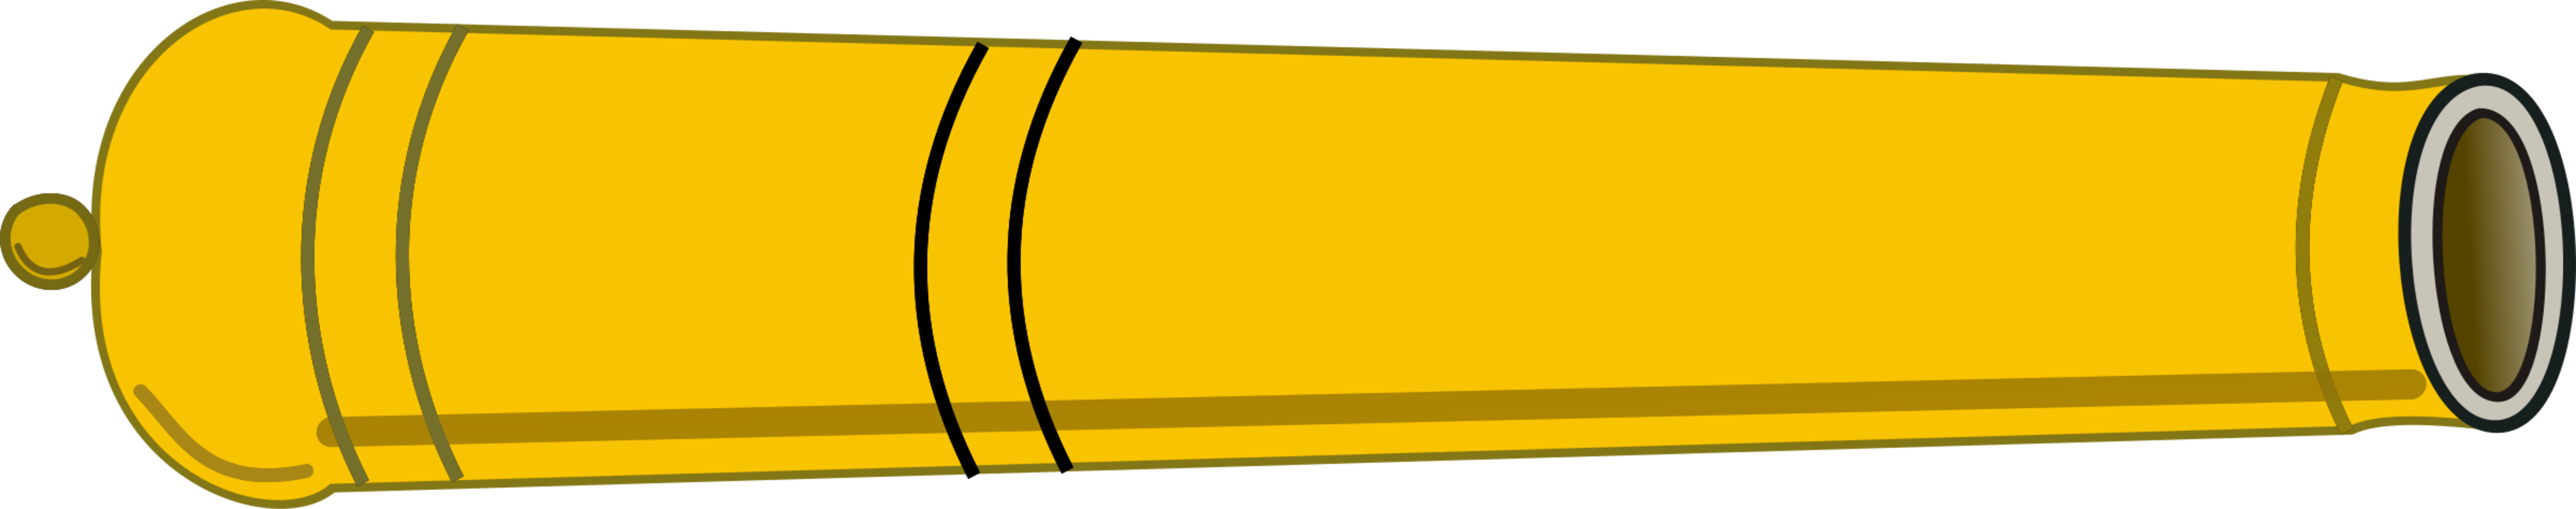 Rectangle,Yellow,Cannon